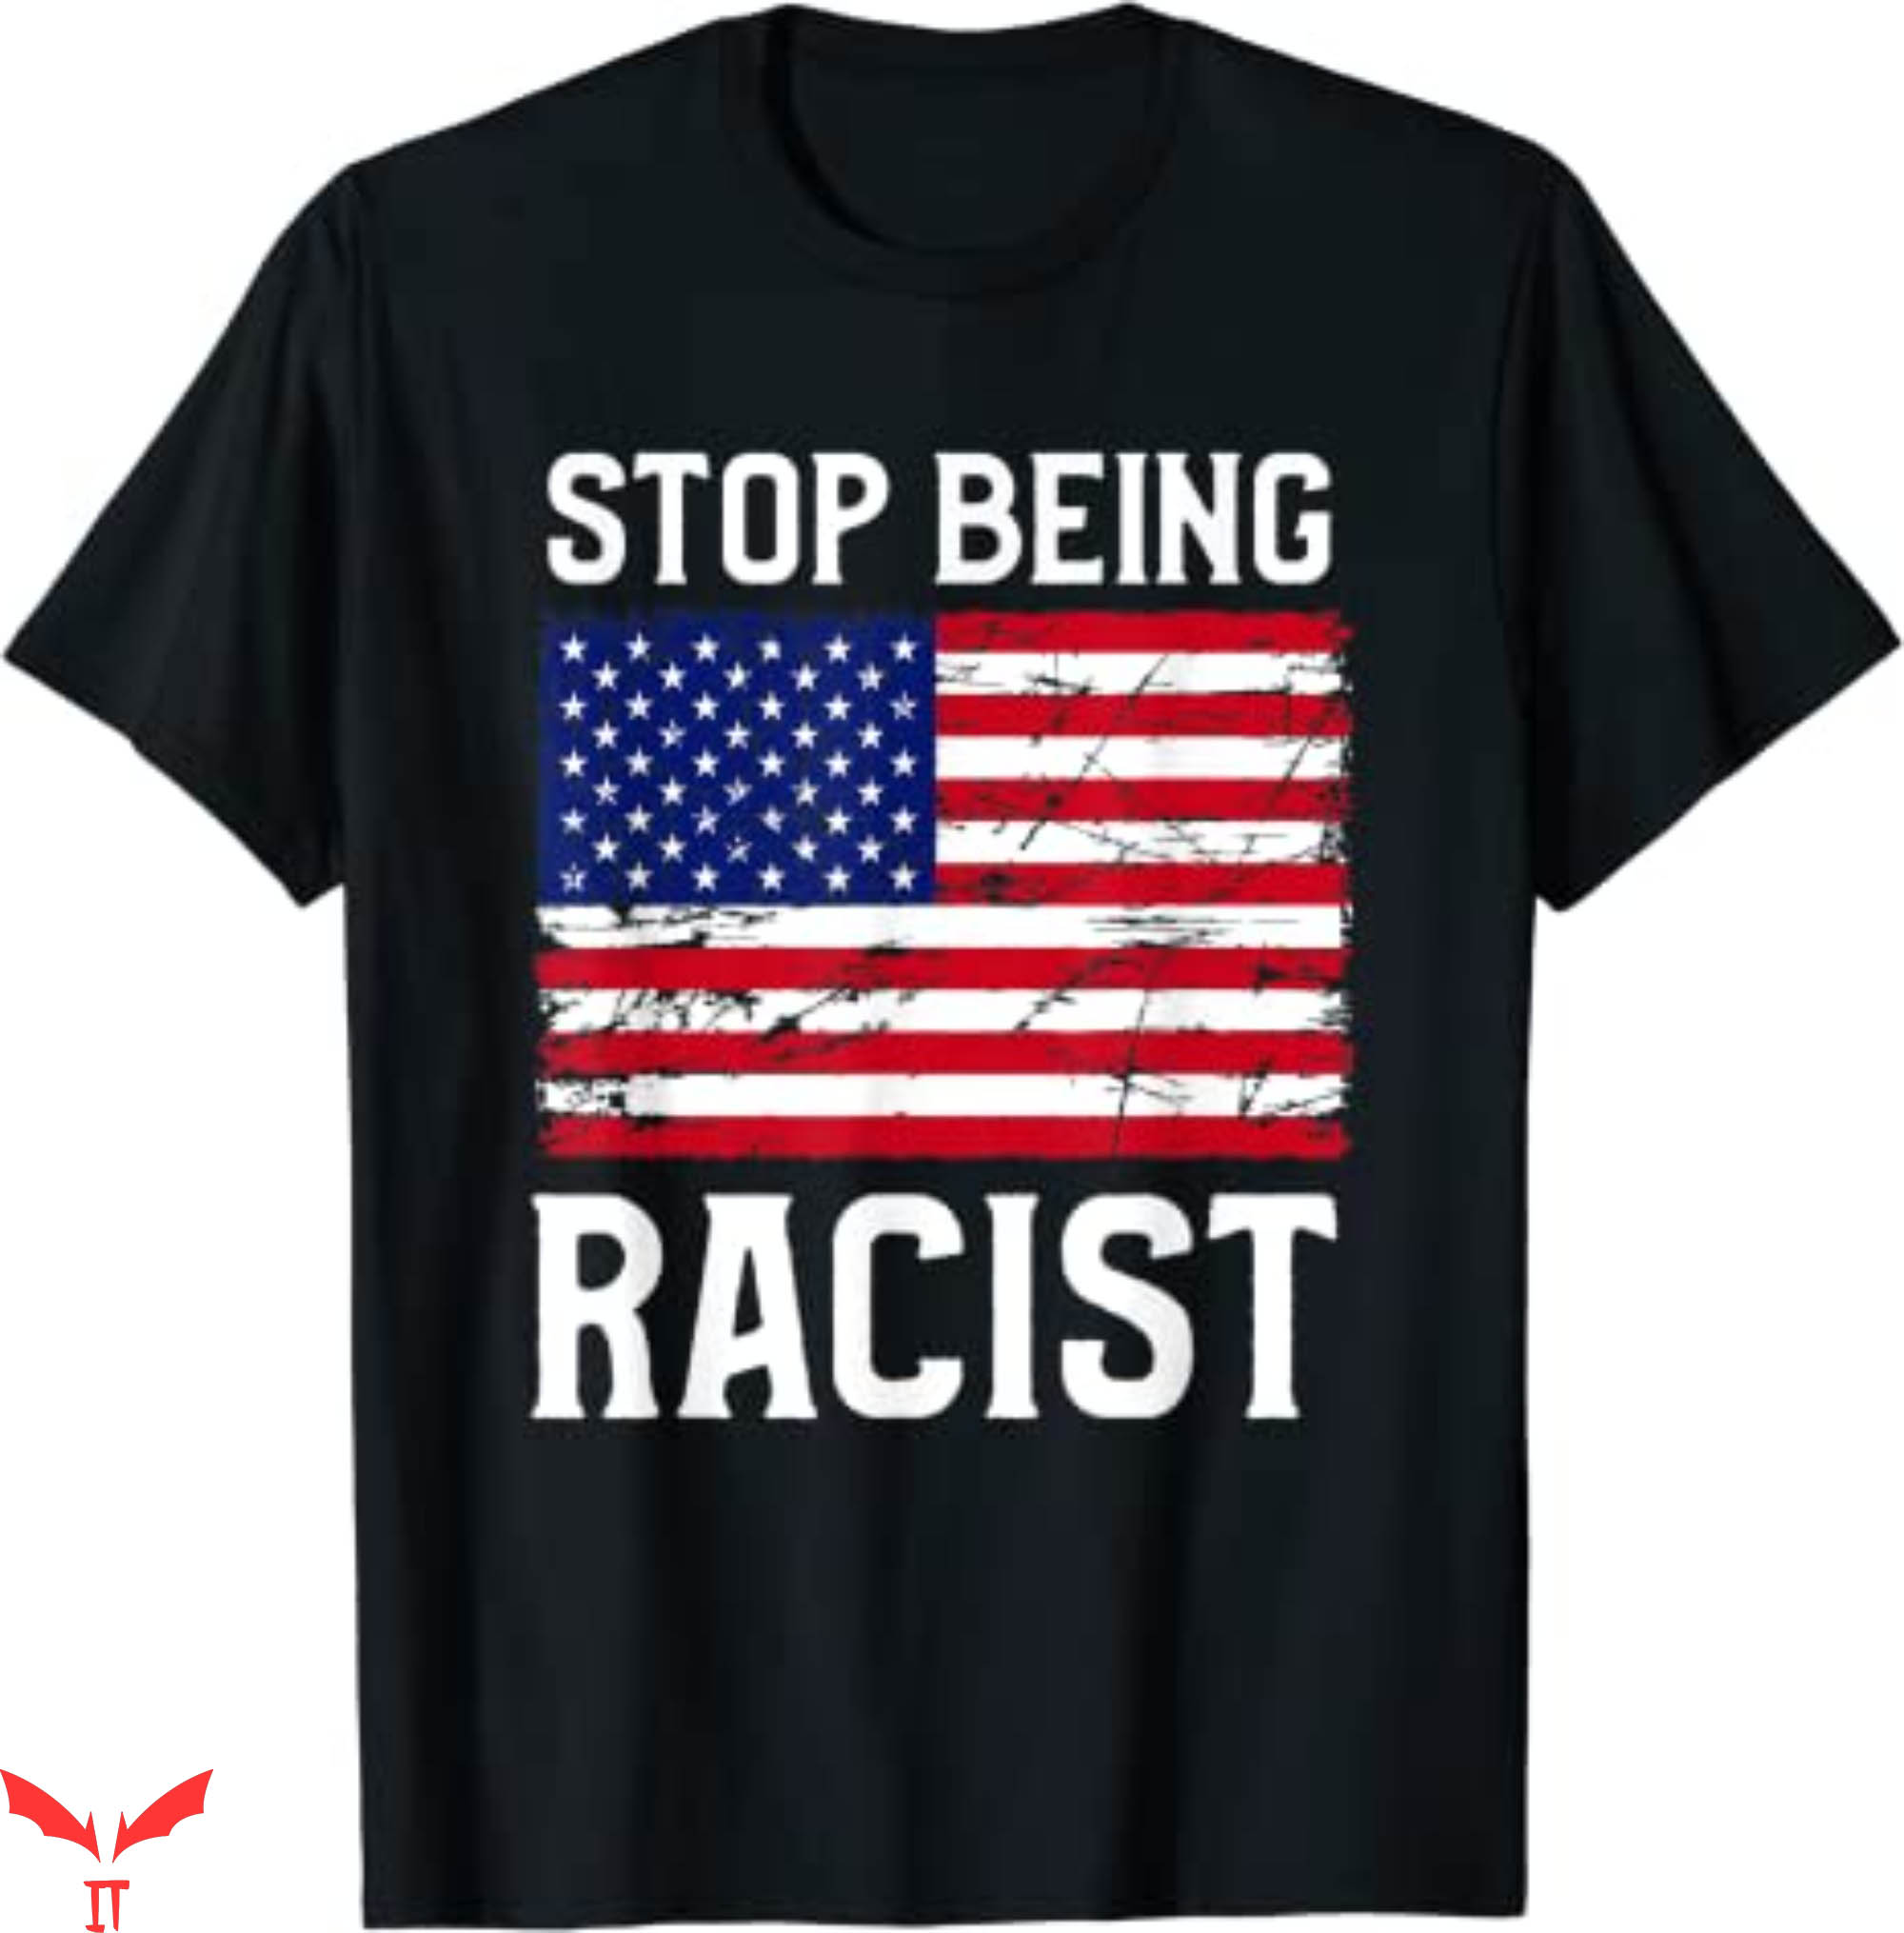 Stop Being Racist T-Shirt Anti Racing Funny Style Tee Shirt